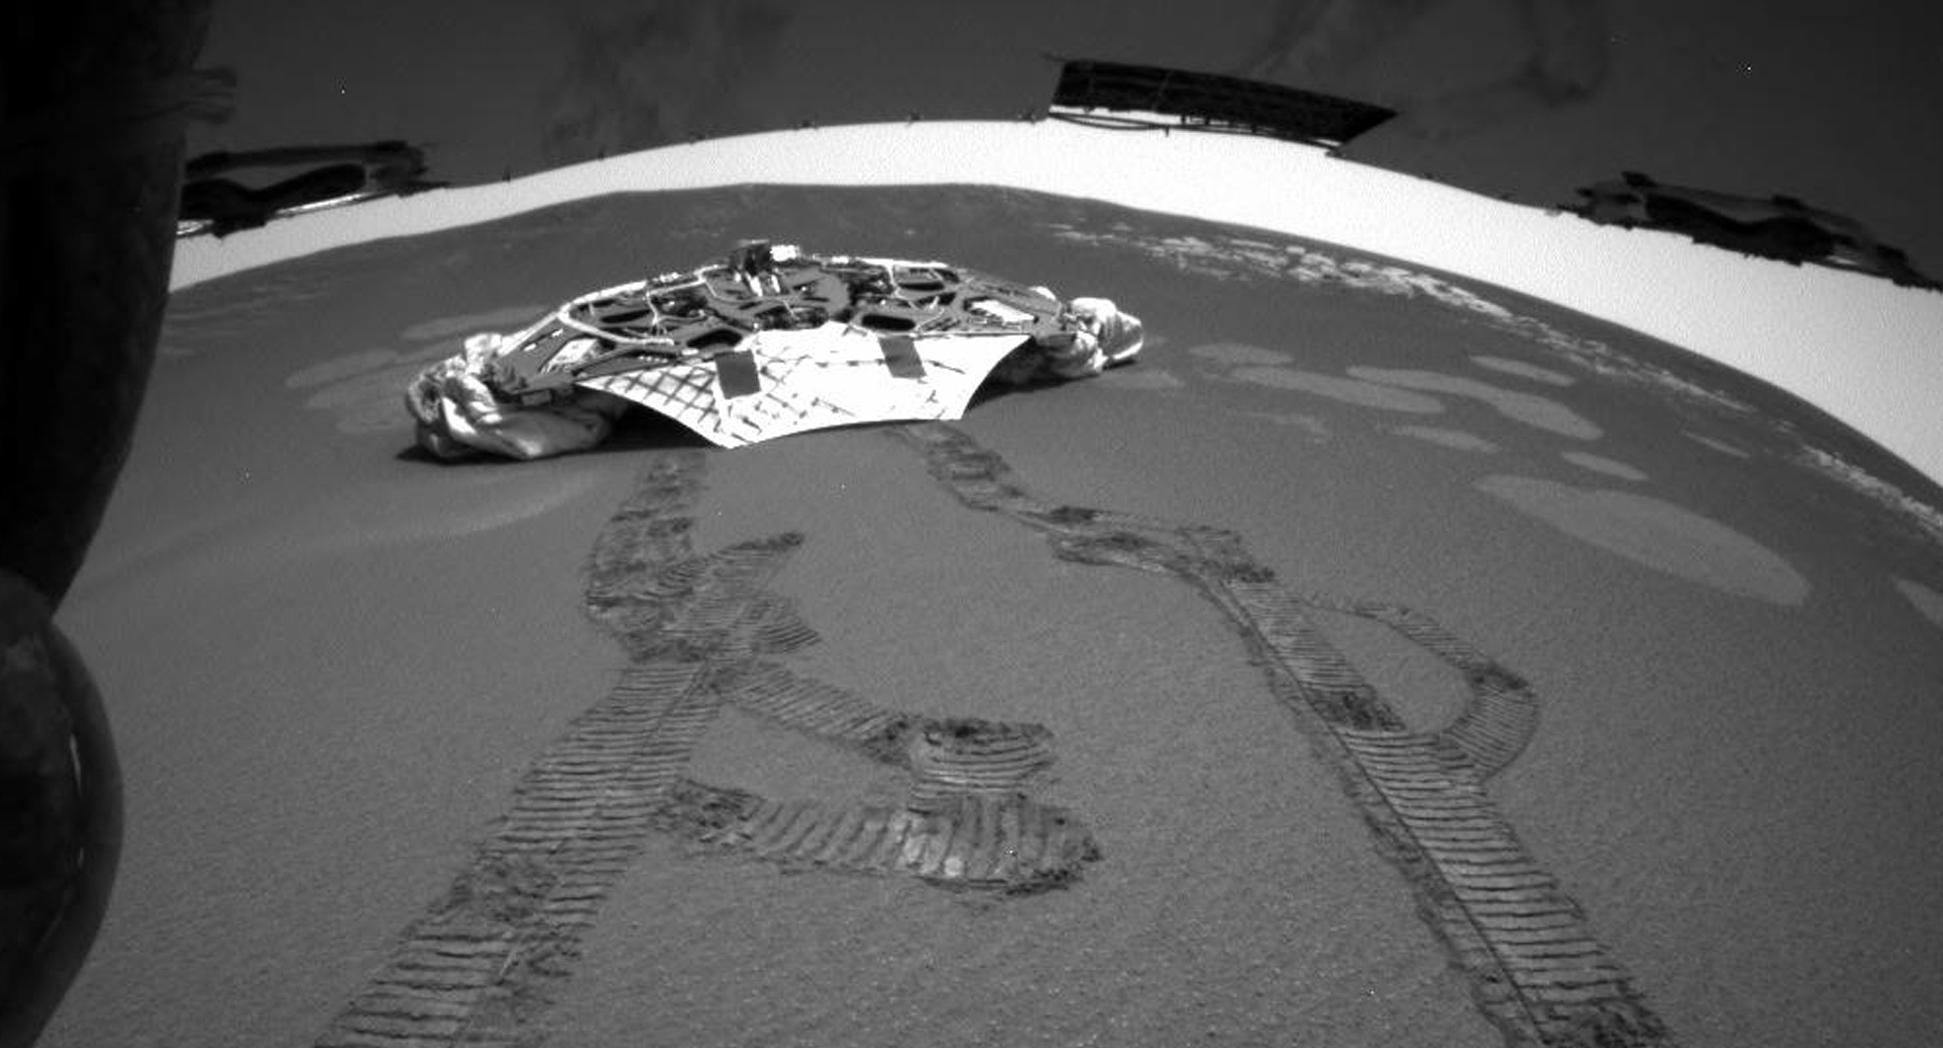 This photo released Thursday, Feb. 5, 2004 made by one of the rear hazard-avoidance cameras on NASA's Opportunity rover, shows Opportunity's landing platform, with freshly made tracks leading away from it